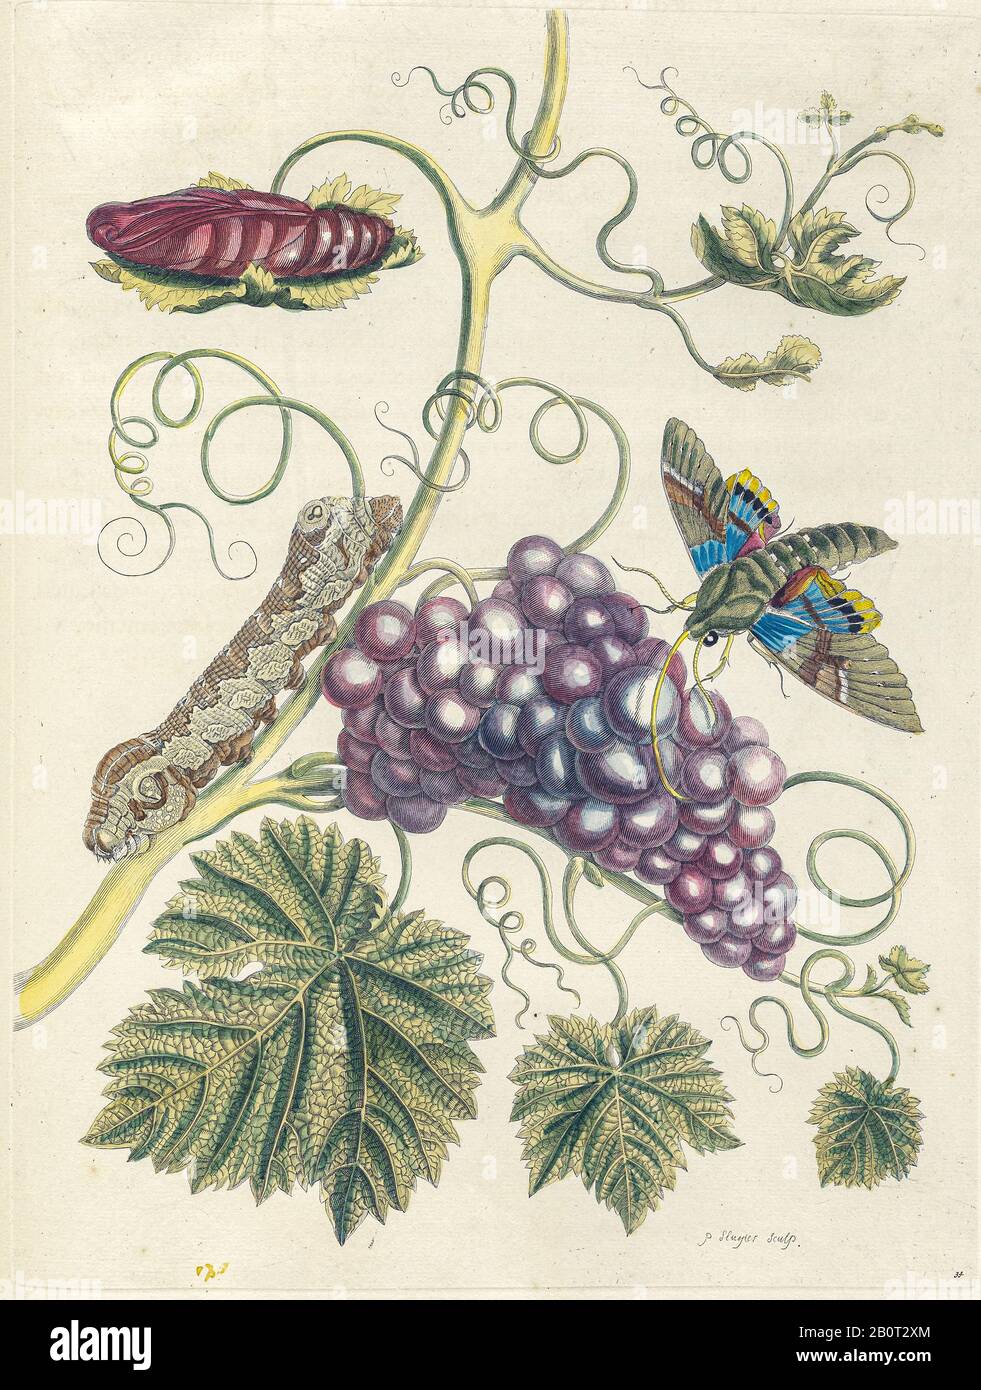 Plant and butterfly from Metamorphosis insectorum Surinamensium (Surinam insects) a hand coloured 18th century Book by Maria Sibylla Merian published Stock Photo